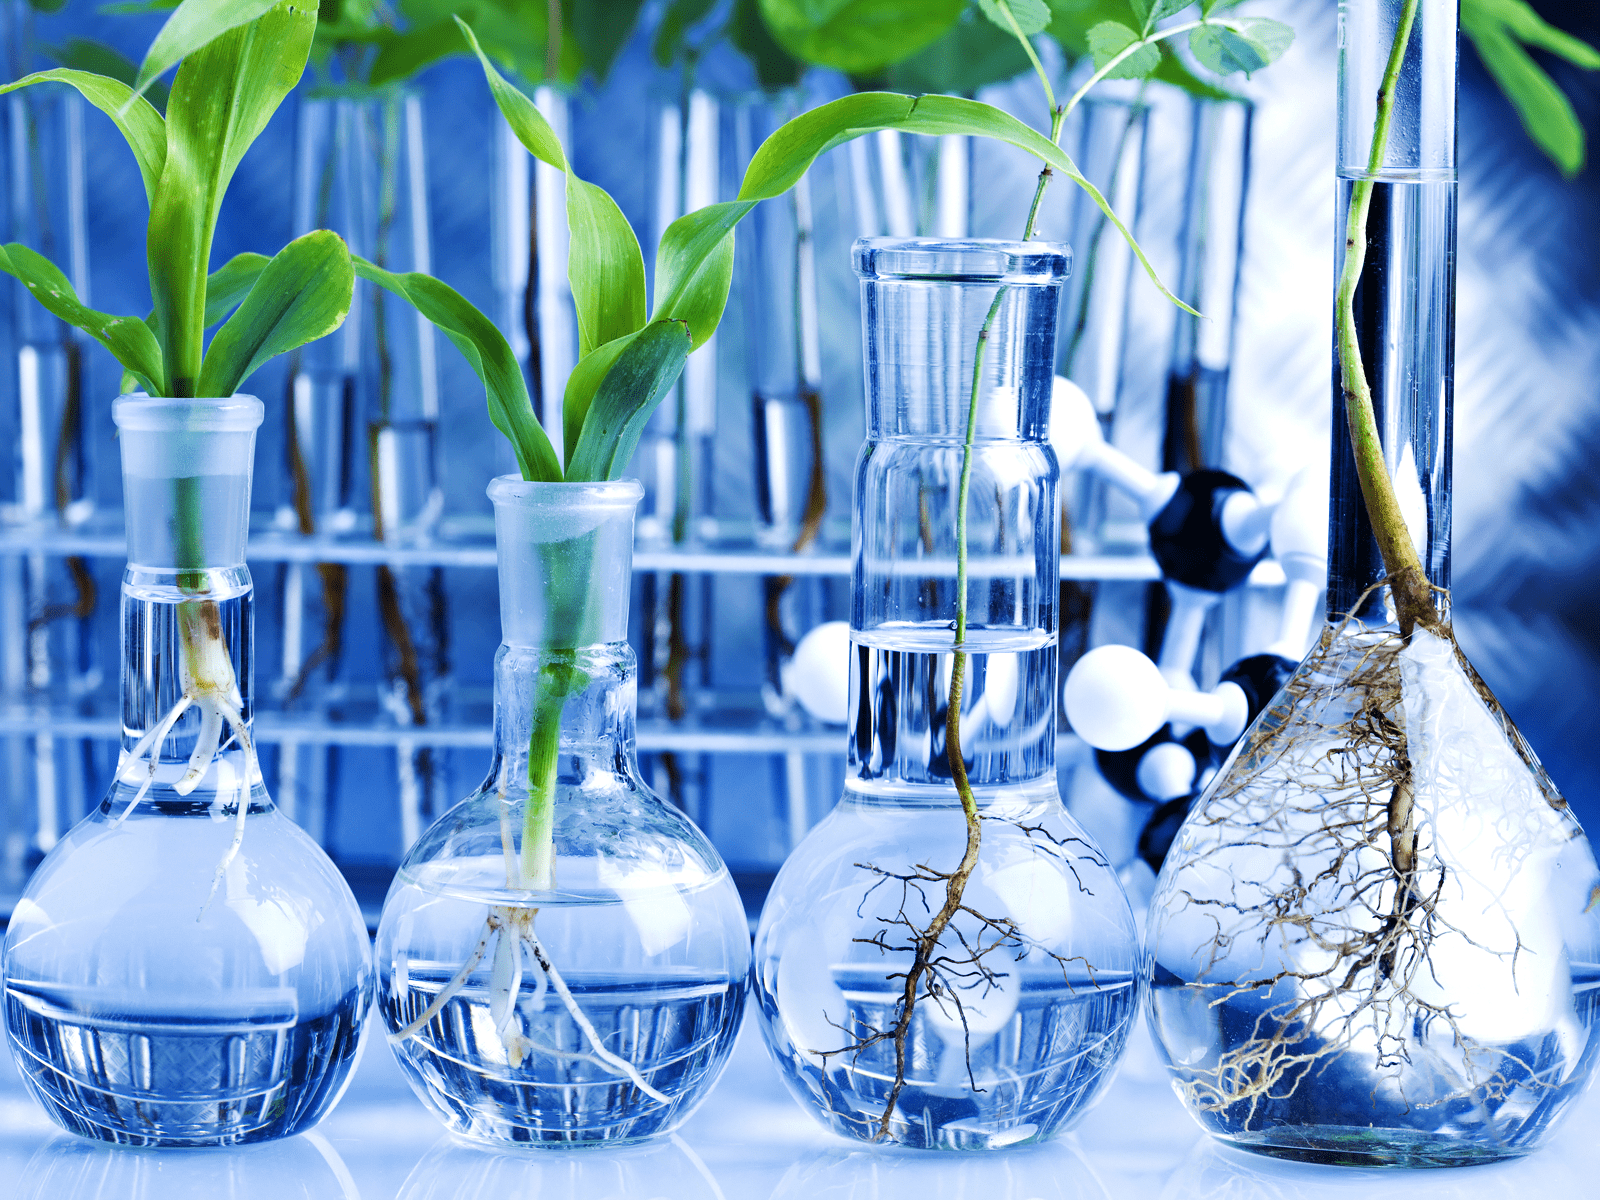 research paper on environmental biotechnology